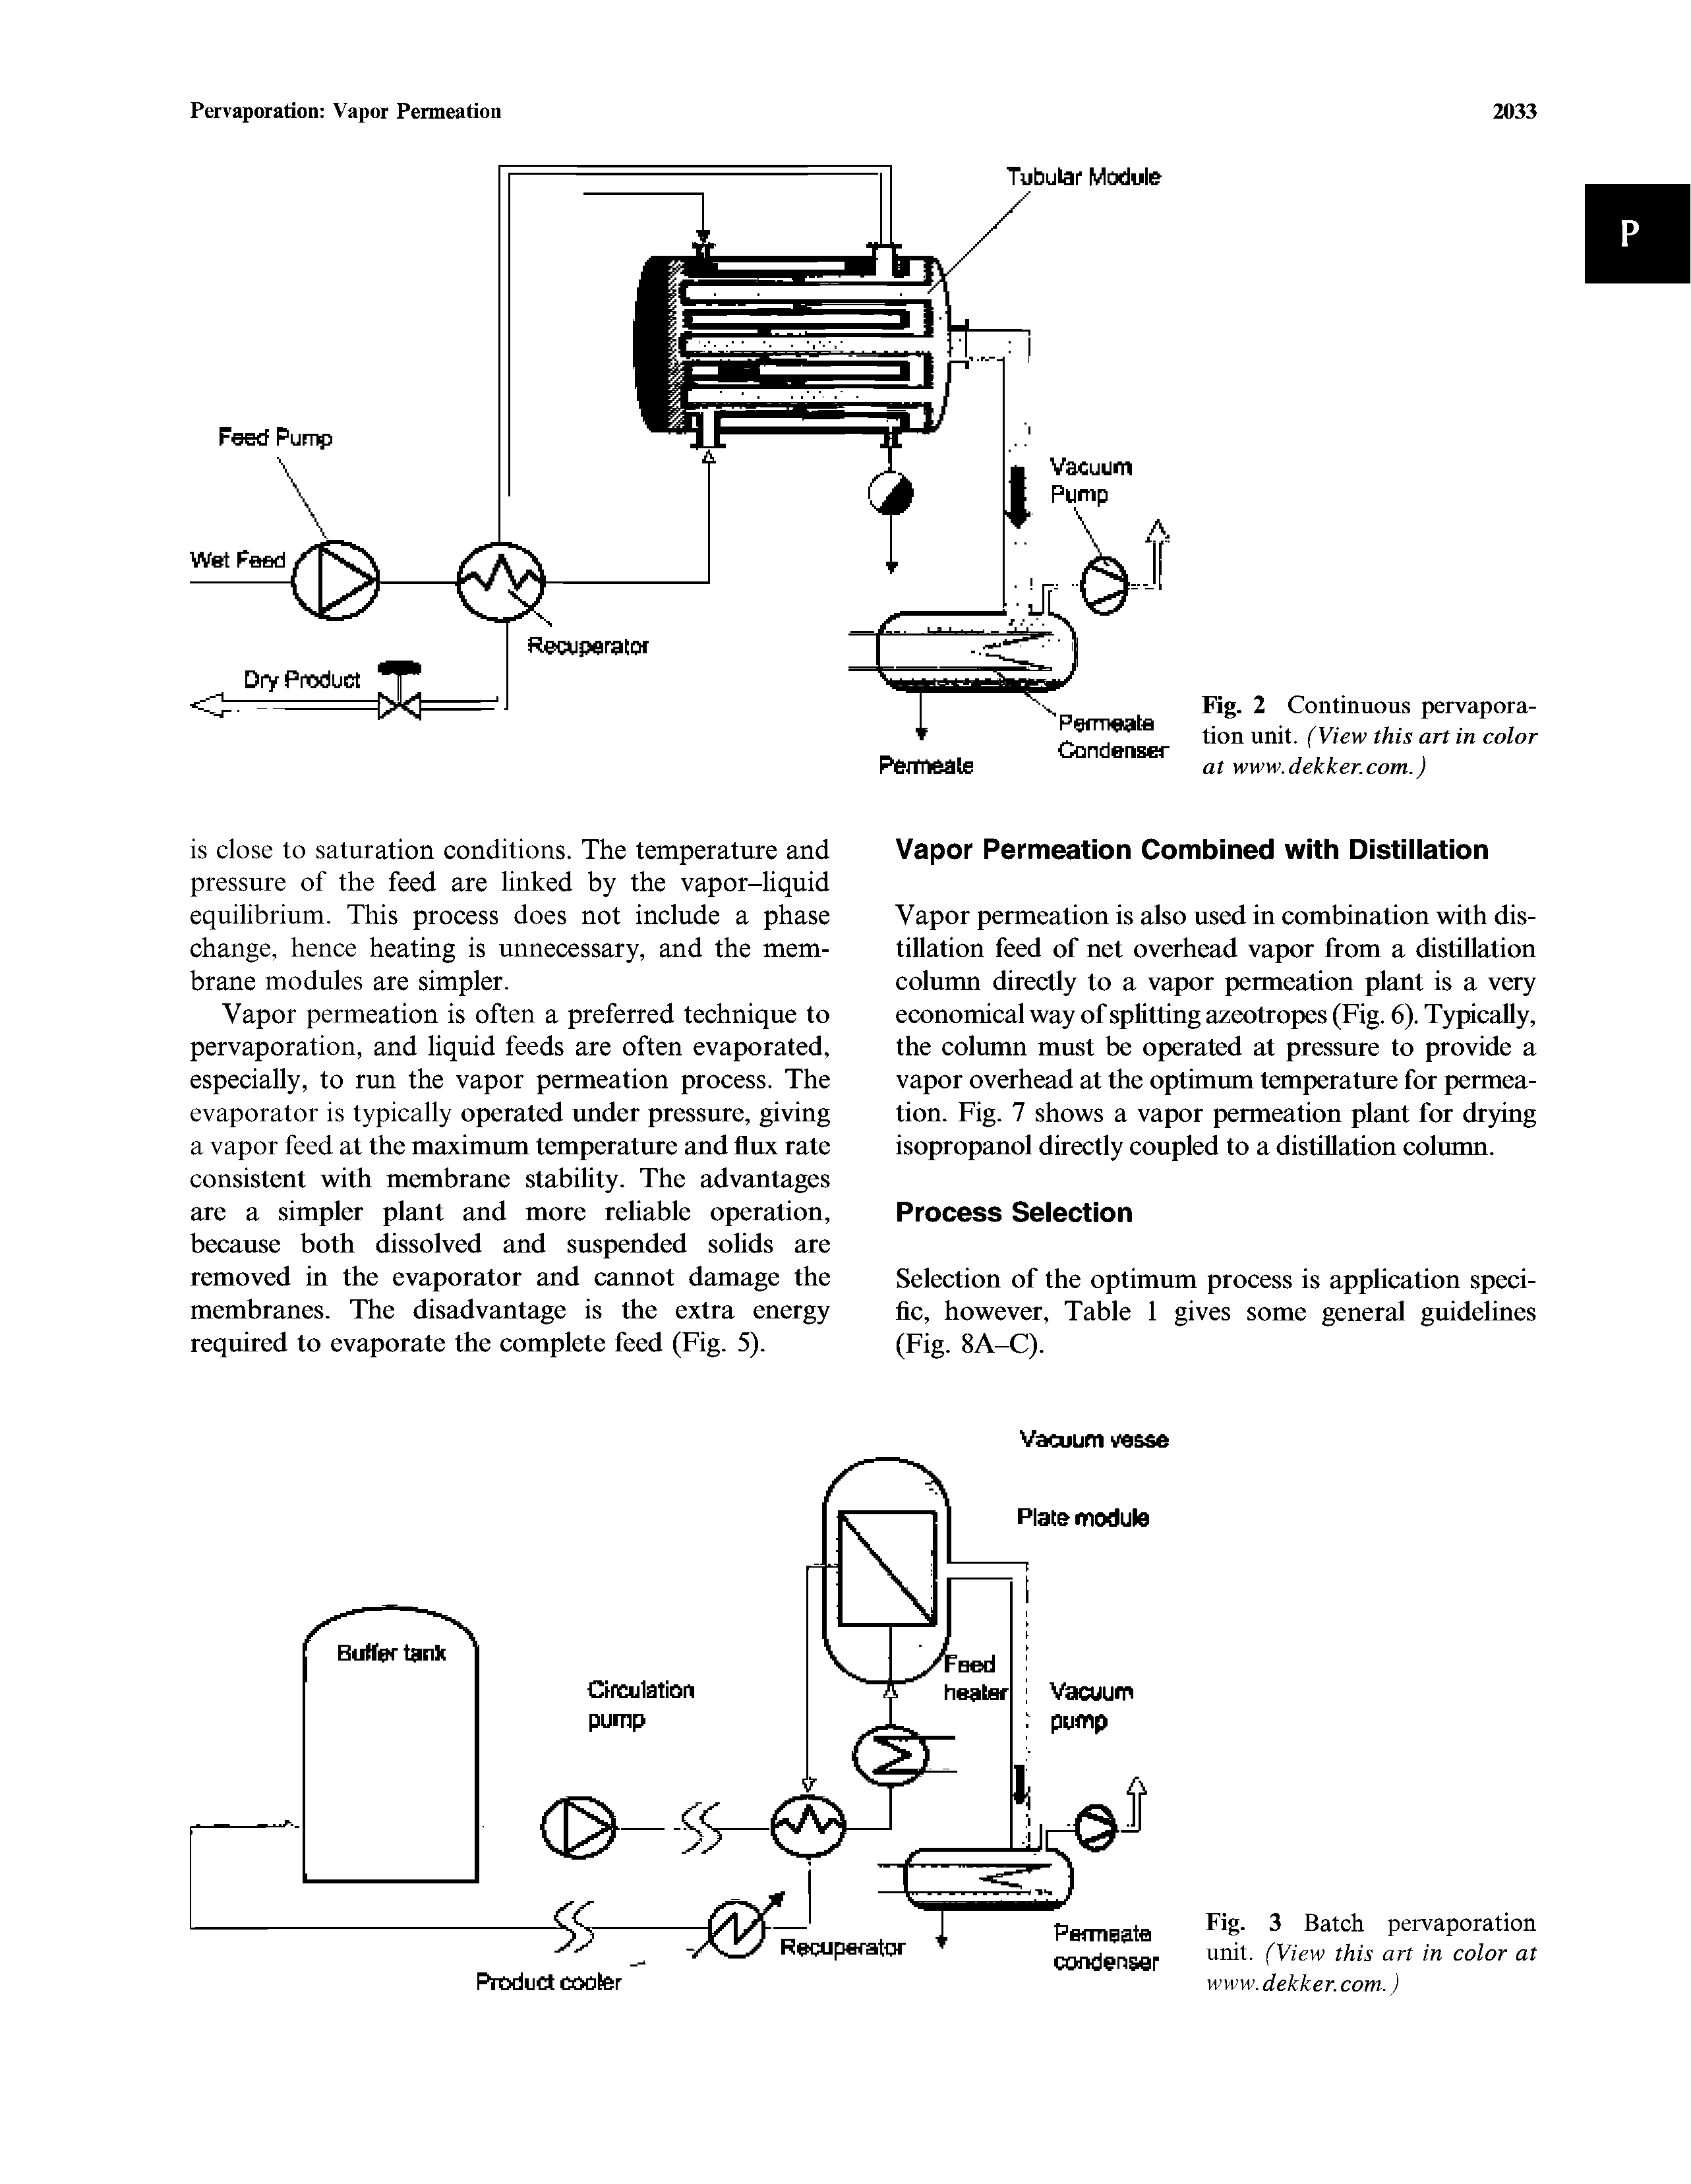 Fig. 2 Continuous pervaporation unit. (View this art in color at www.dekker.com.)...